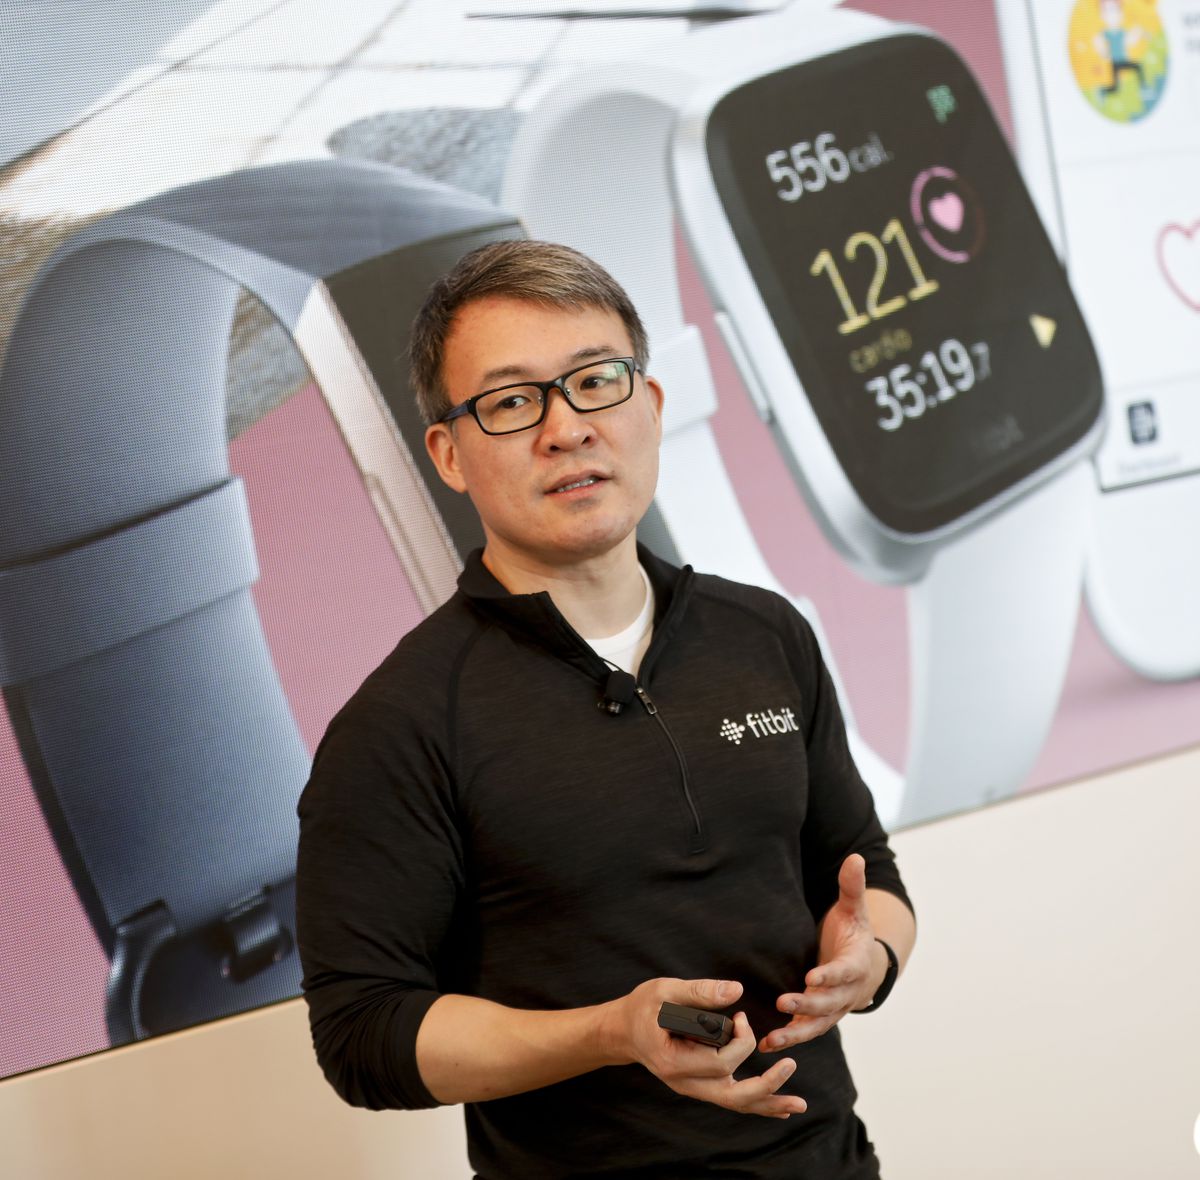 Fitbit CEO James Park announces Fitbit Versa Lite Edition, its newest addition to the Fitbit Versa smart watch family at a media event on Tuesday Mar. 5, 2019 in New York. | Brian Ach/AP Images for Fitbit